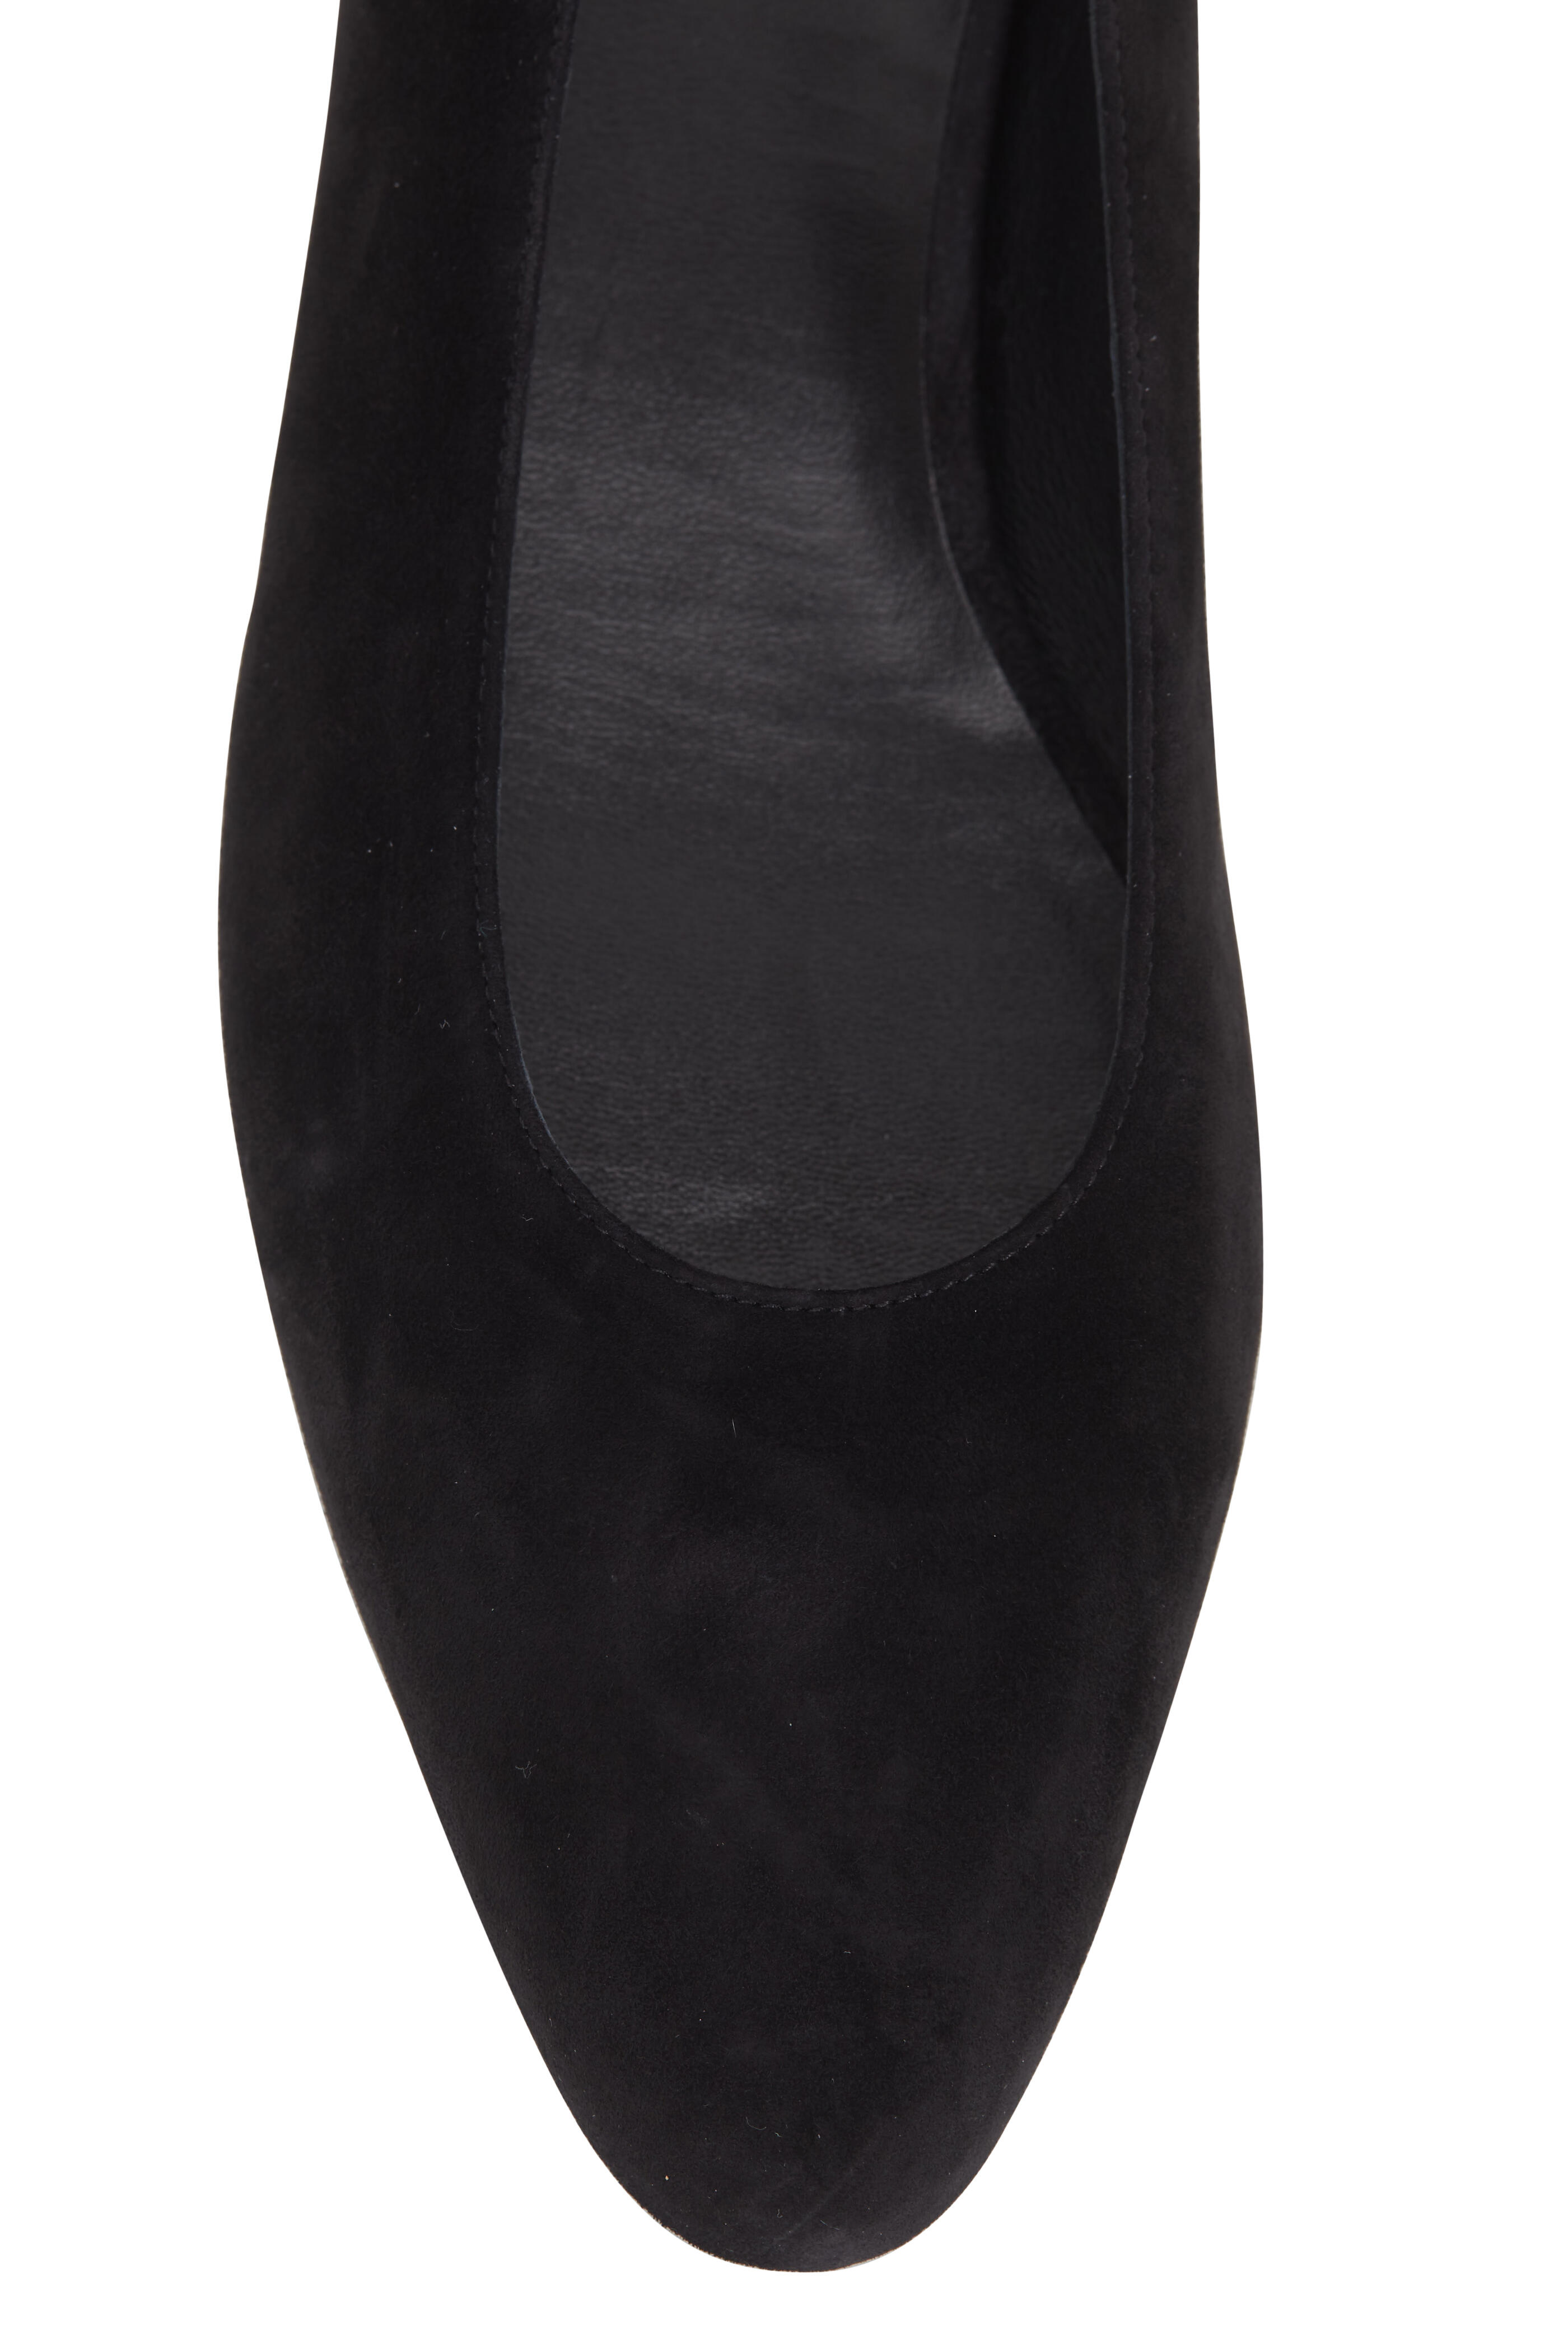 The Row - Lady D Black Suede Ballerina Flat | Mitchell Stores